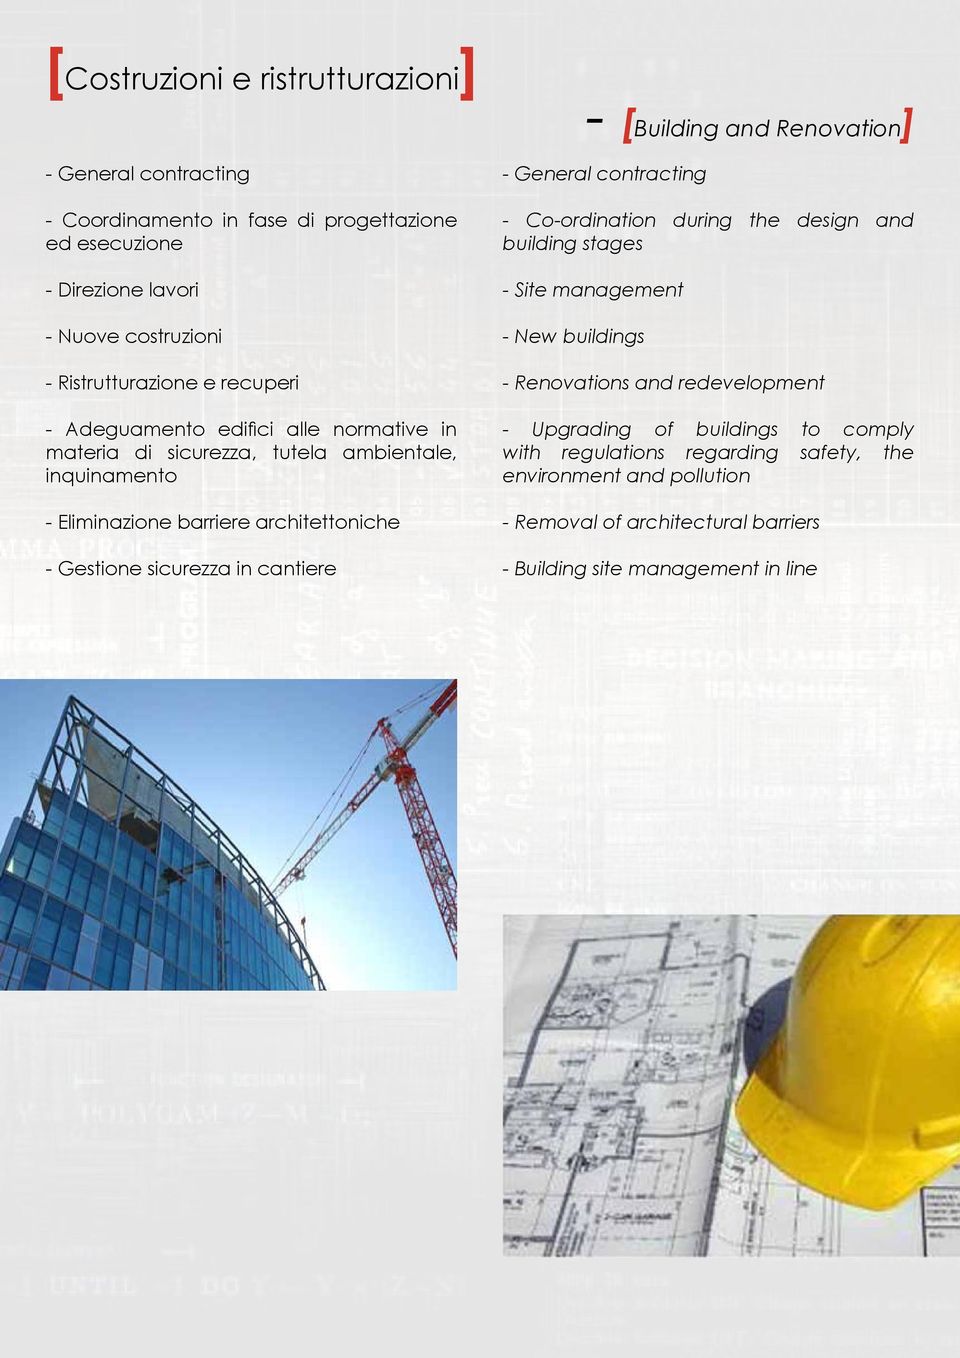 cantiere - General contracting - Co-ordination during the design and building stages - Site management - New buildings - [Building and Renovation] - Renovations and